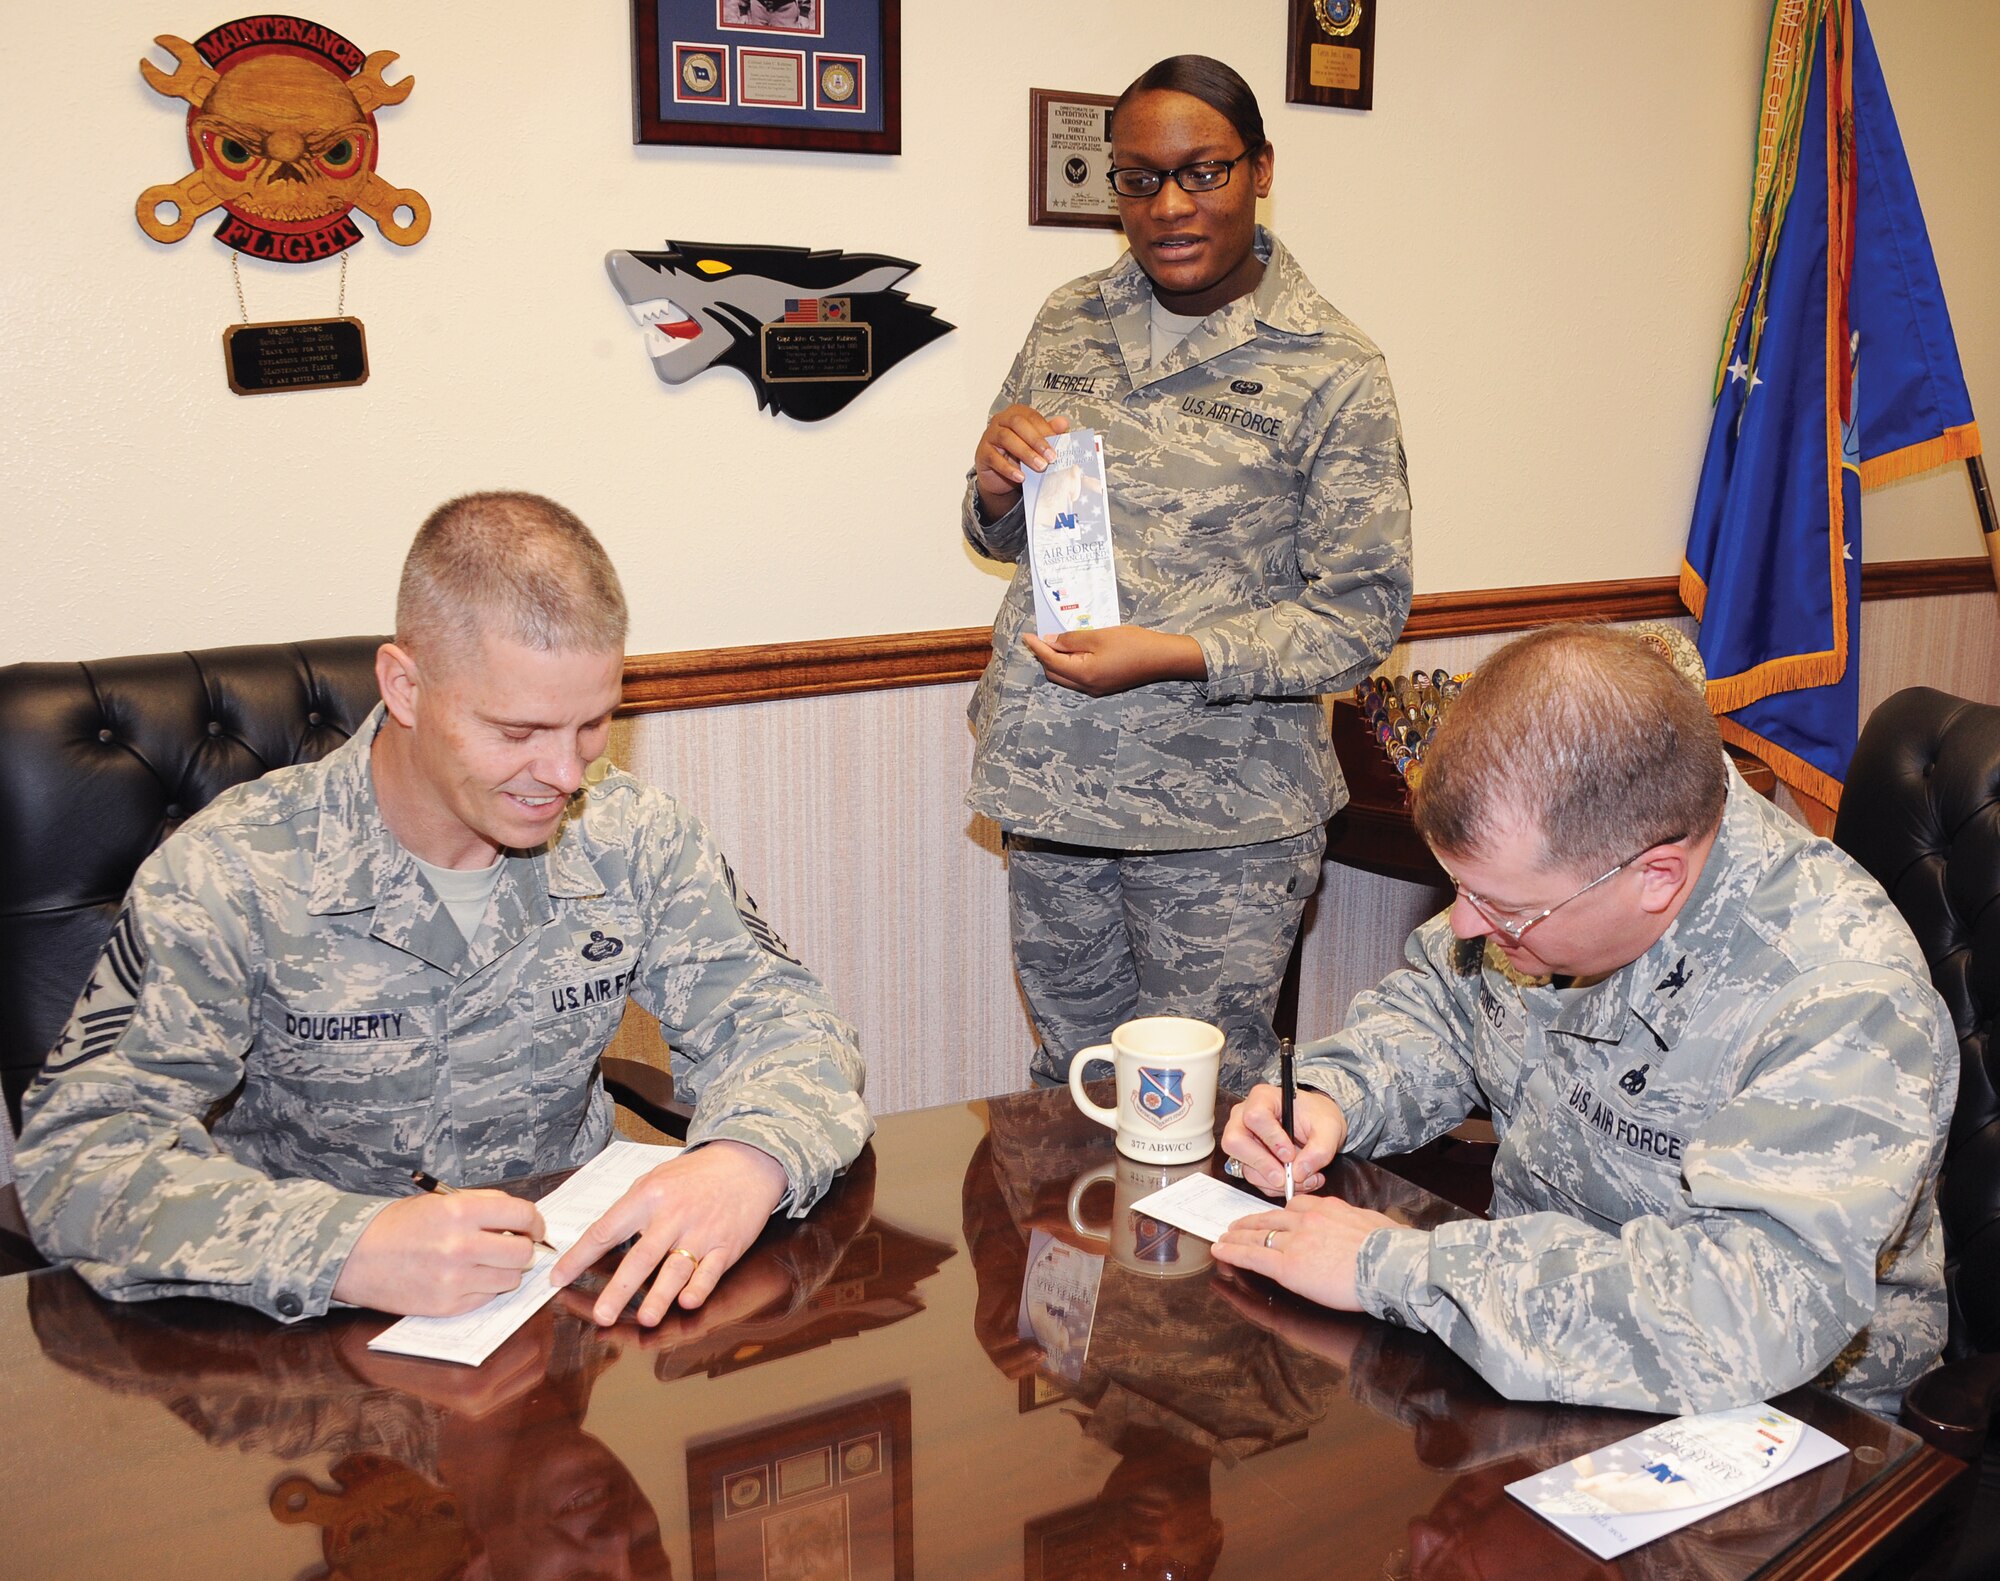 Chief Master Sgt. John Dougherty, command chief for the Air Force Nuclear Weapons Center and 377th Air Base Wing, left, and Col. John Kubinec, 377 ABW commander, right, sign their Air Force Assistance Fund pledge forms March 1 at Kirtland AFB. Staff Sgt. Kimberly Merrell, center, is an AFAF campaign keyworker for the 377 ABW staff.  